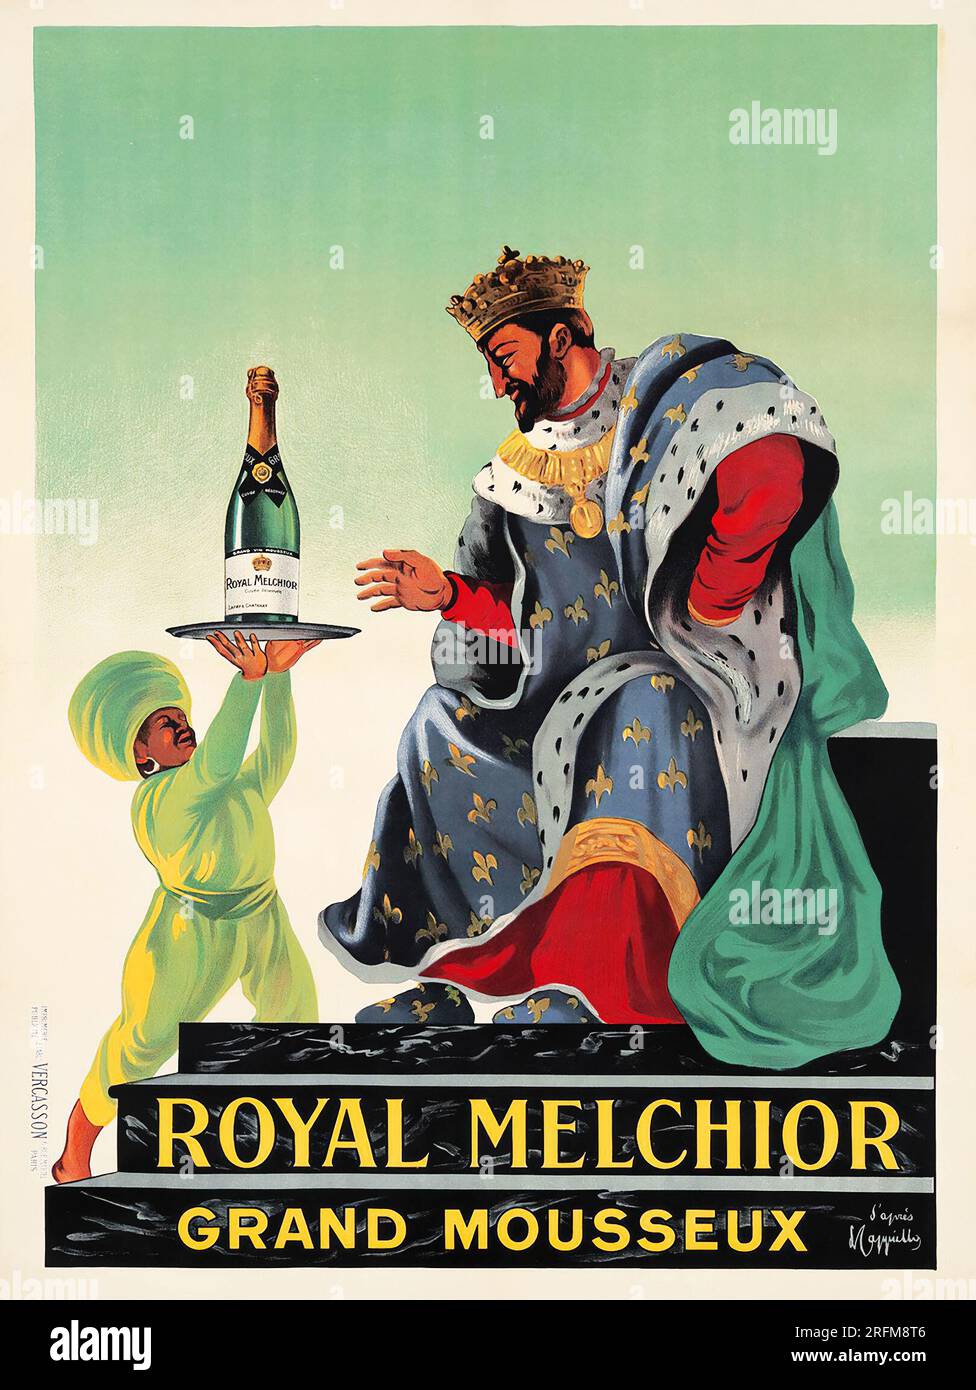 Royal Melchior. 1921 - Vintage alcohol advertisement poster by Leonetto Cappiello feat King Francois I reaching for a bottle of Royal Melchior sparkling wine Stock Photo